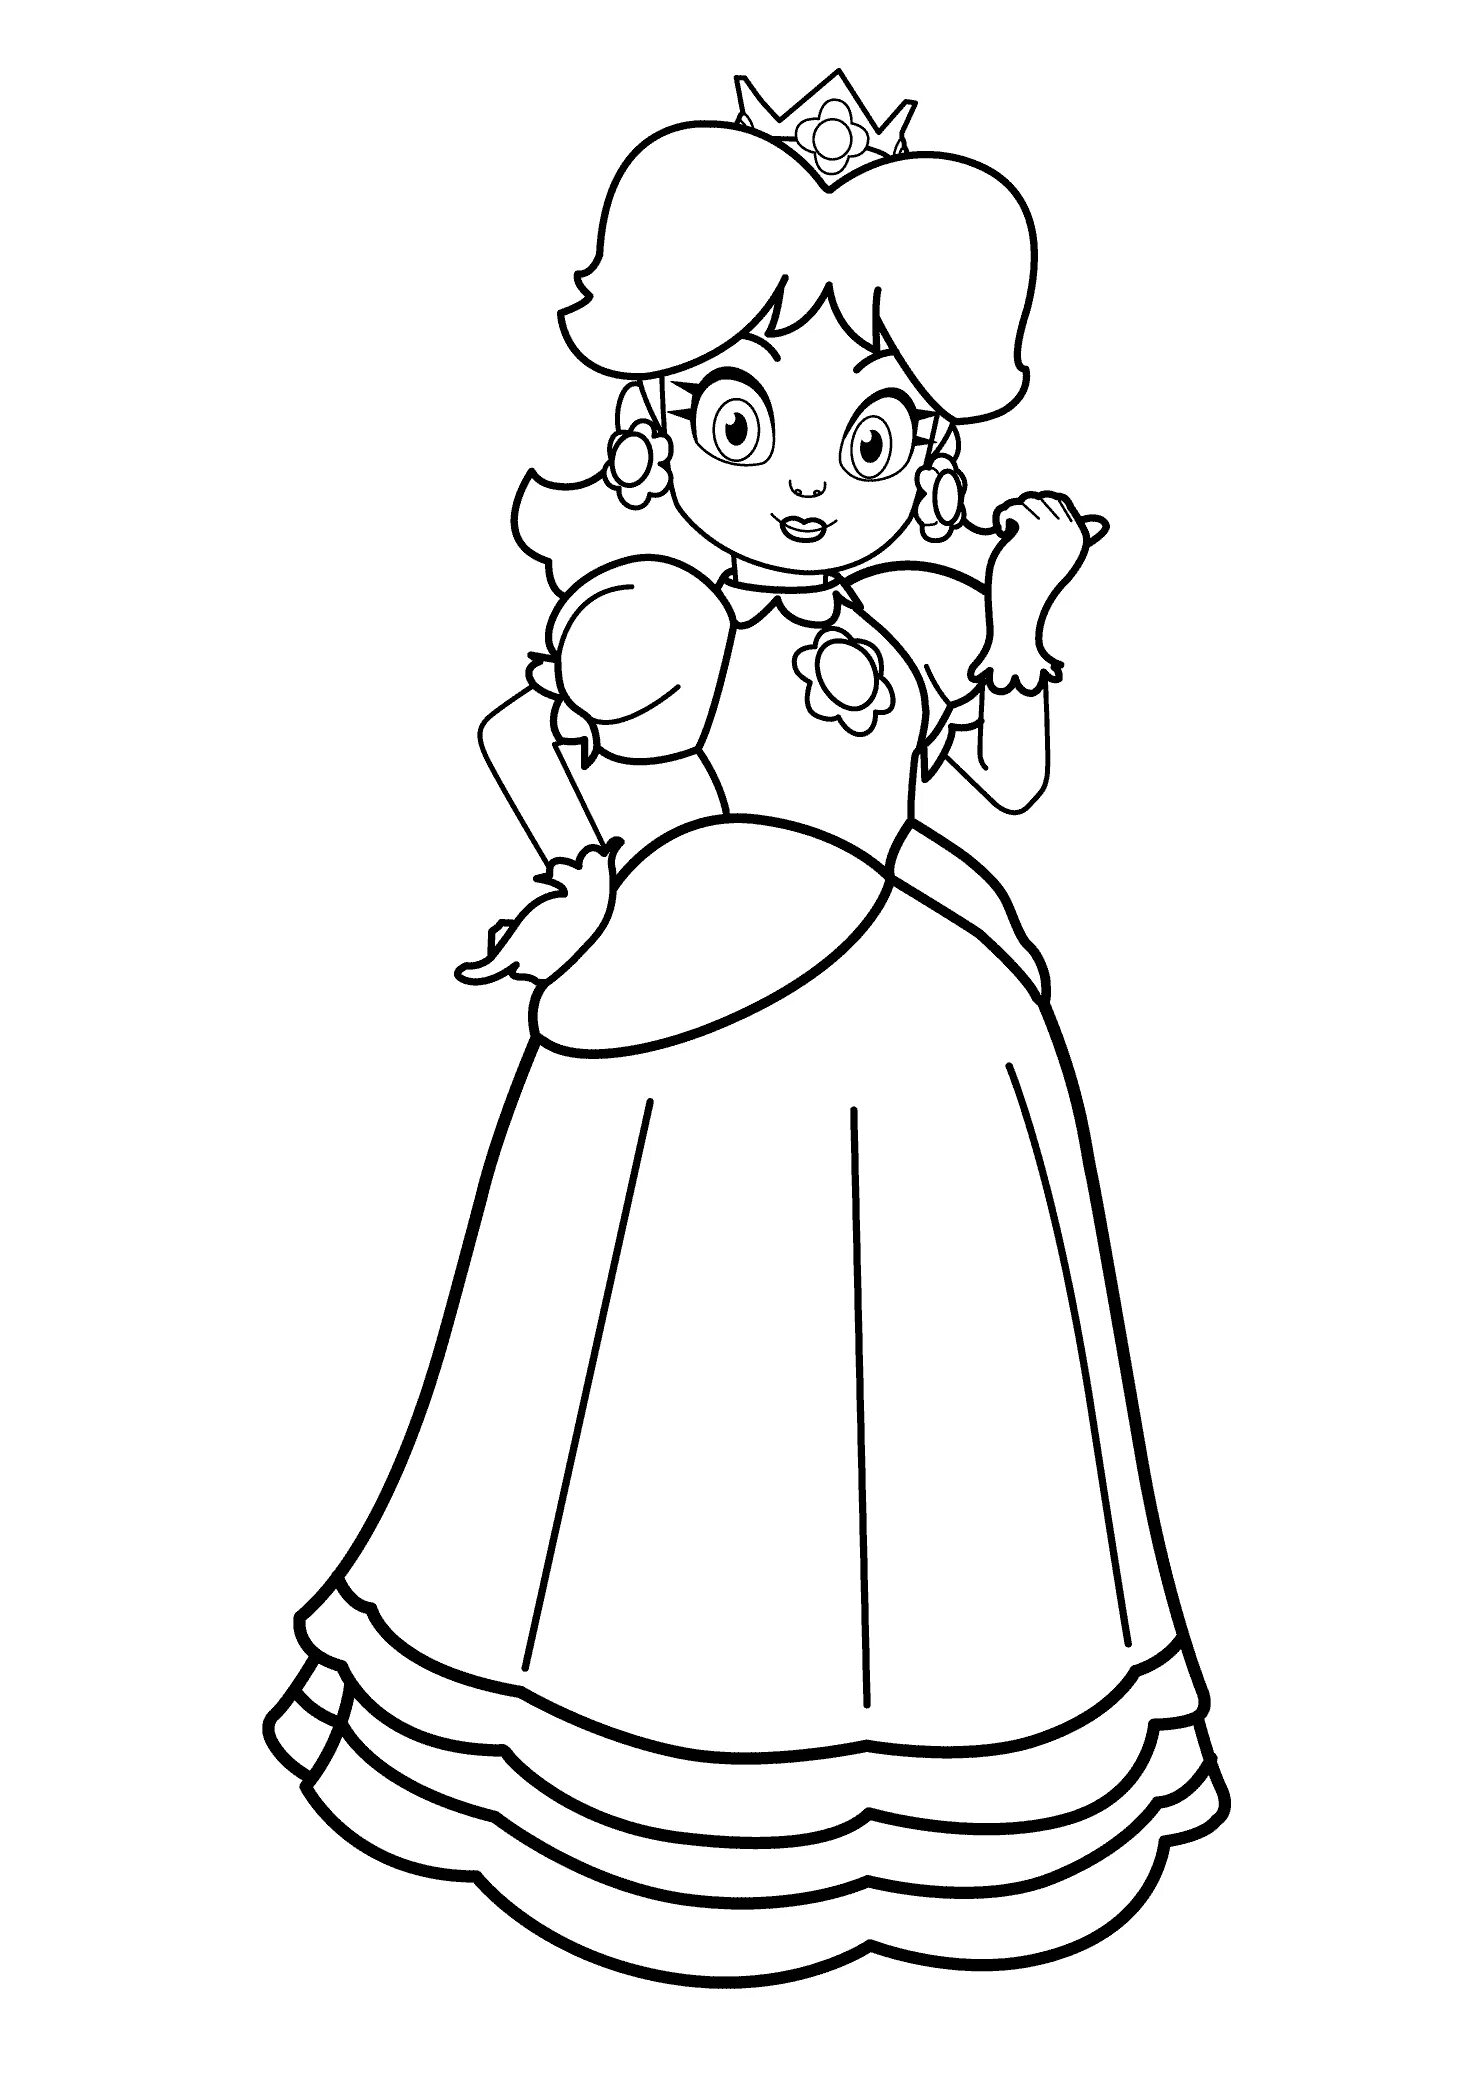 Exquisite princess coloring pages for girls